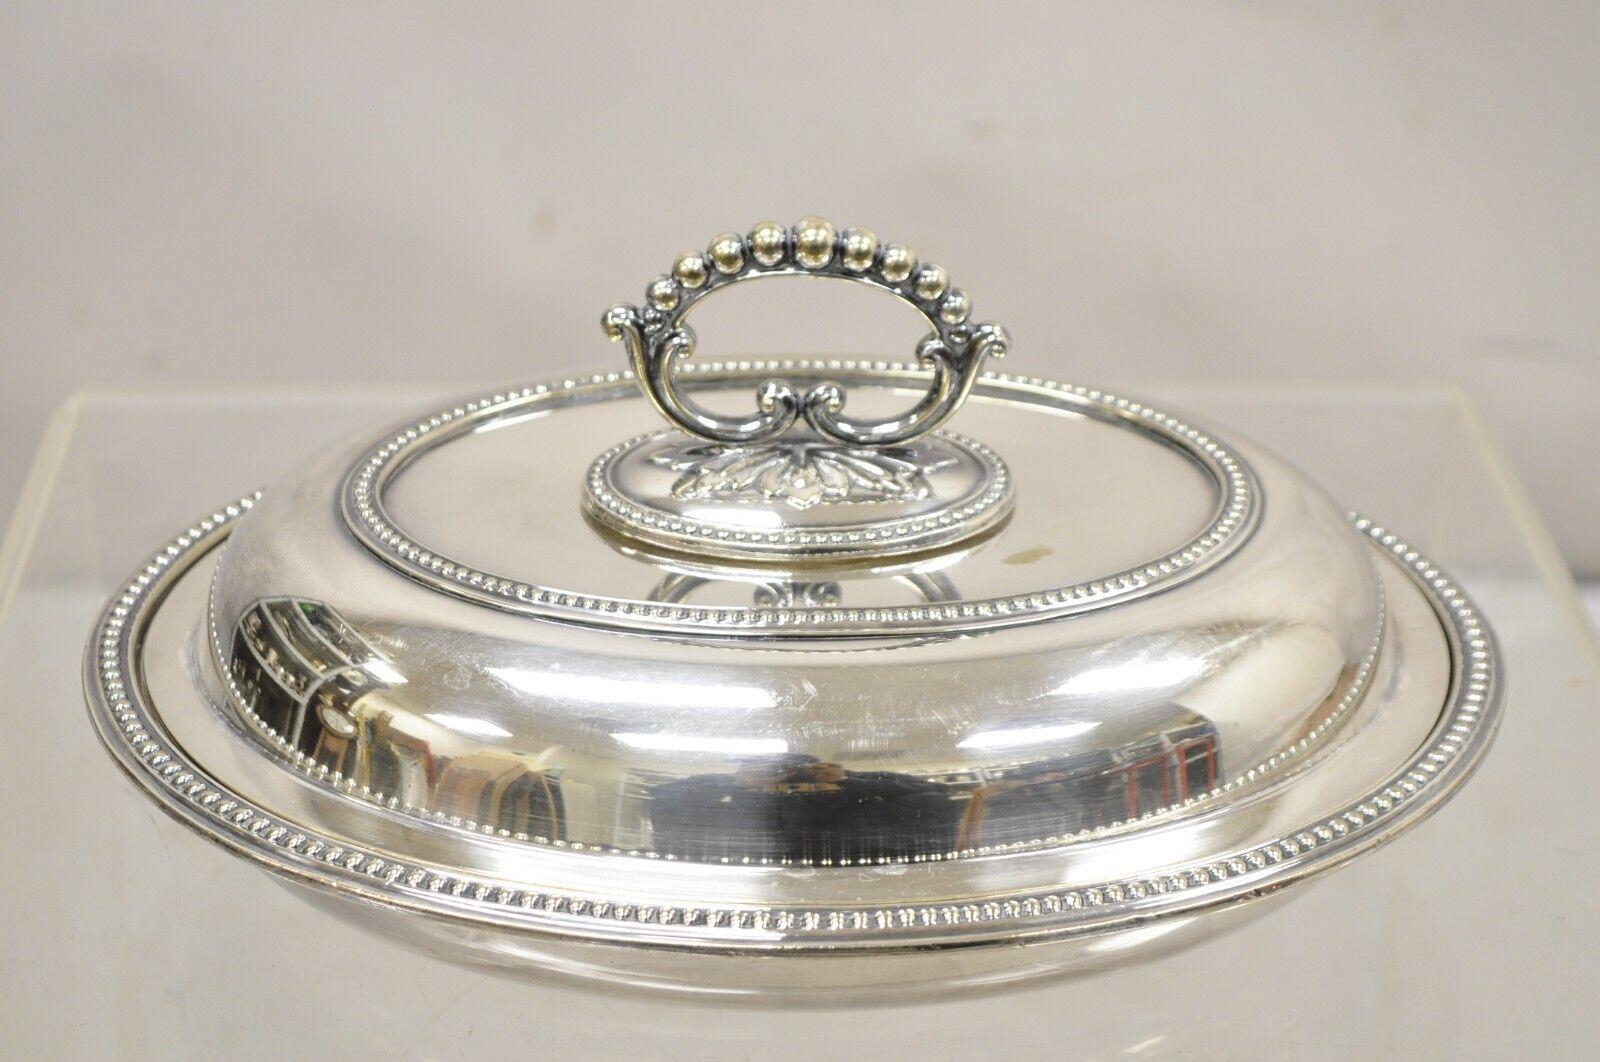 Mappin & Webb's Prince's Plate English Sheffield Silver Plated Covered Dish For Sale 3